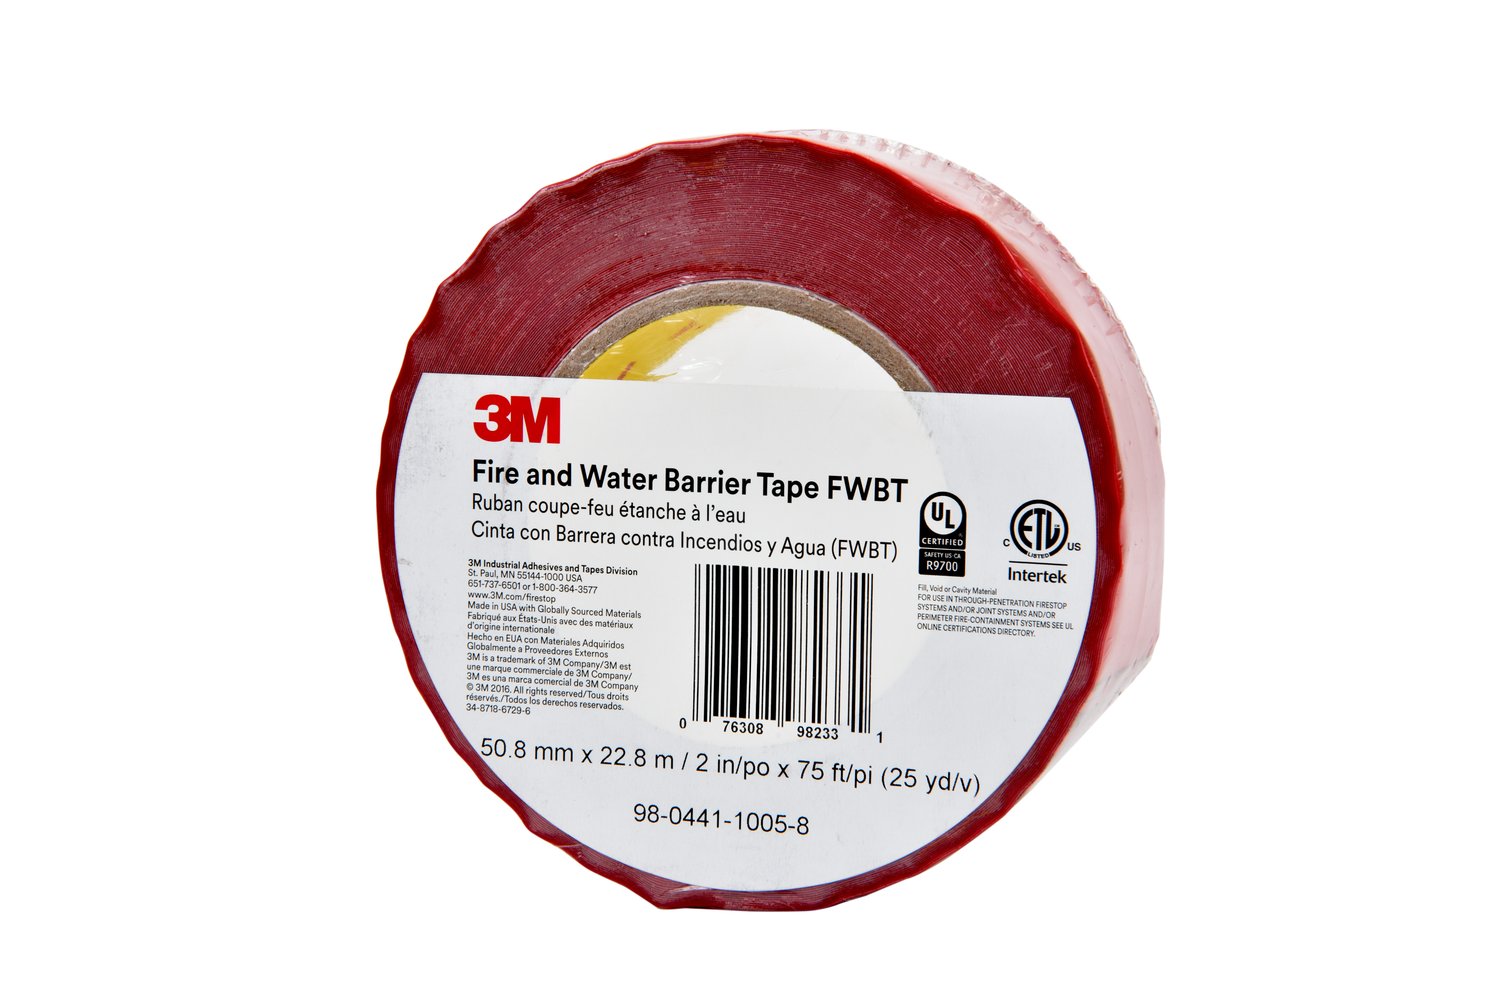 7010401346 - 3M Fire and Water Barrier Tape FWBT2, Translucent, 2 in x 75 ft, 24
Each/Case